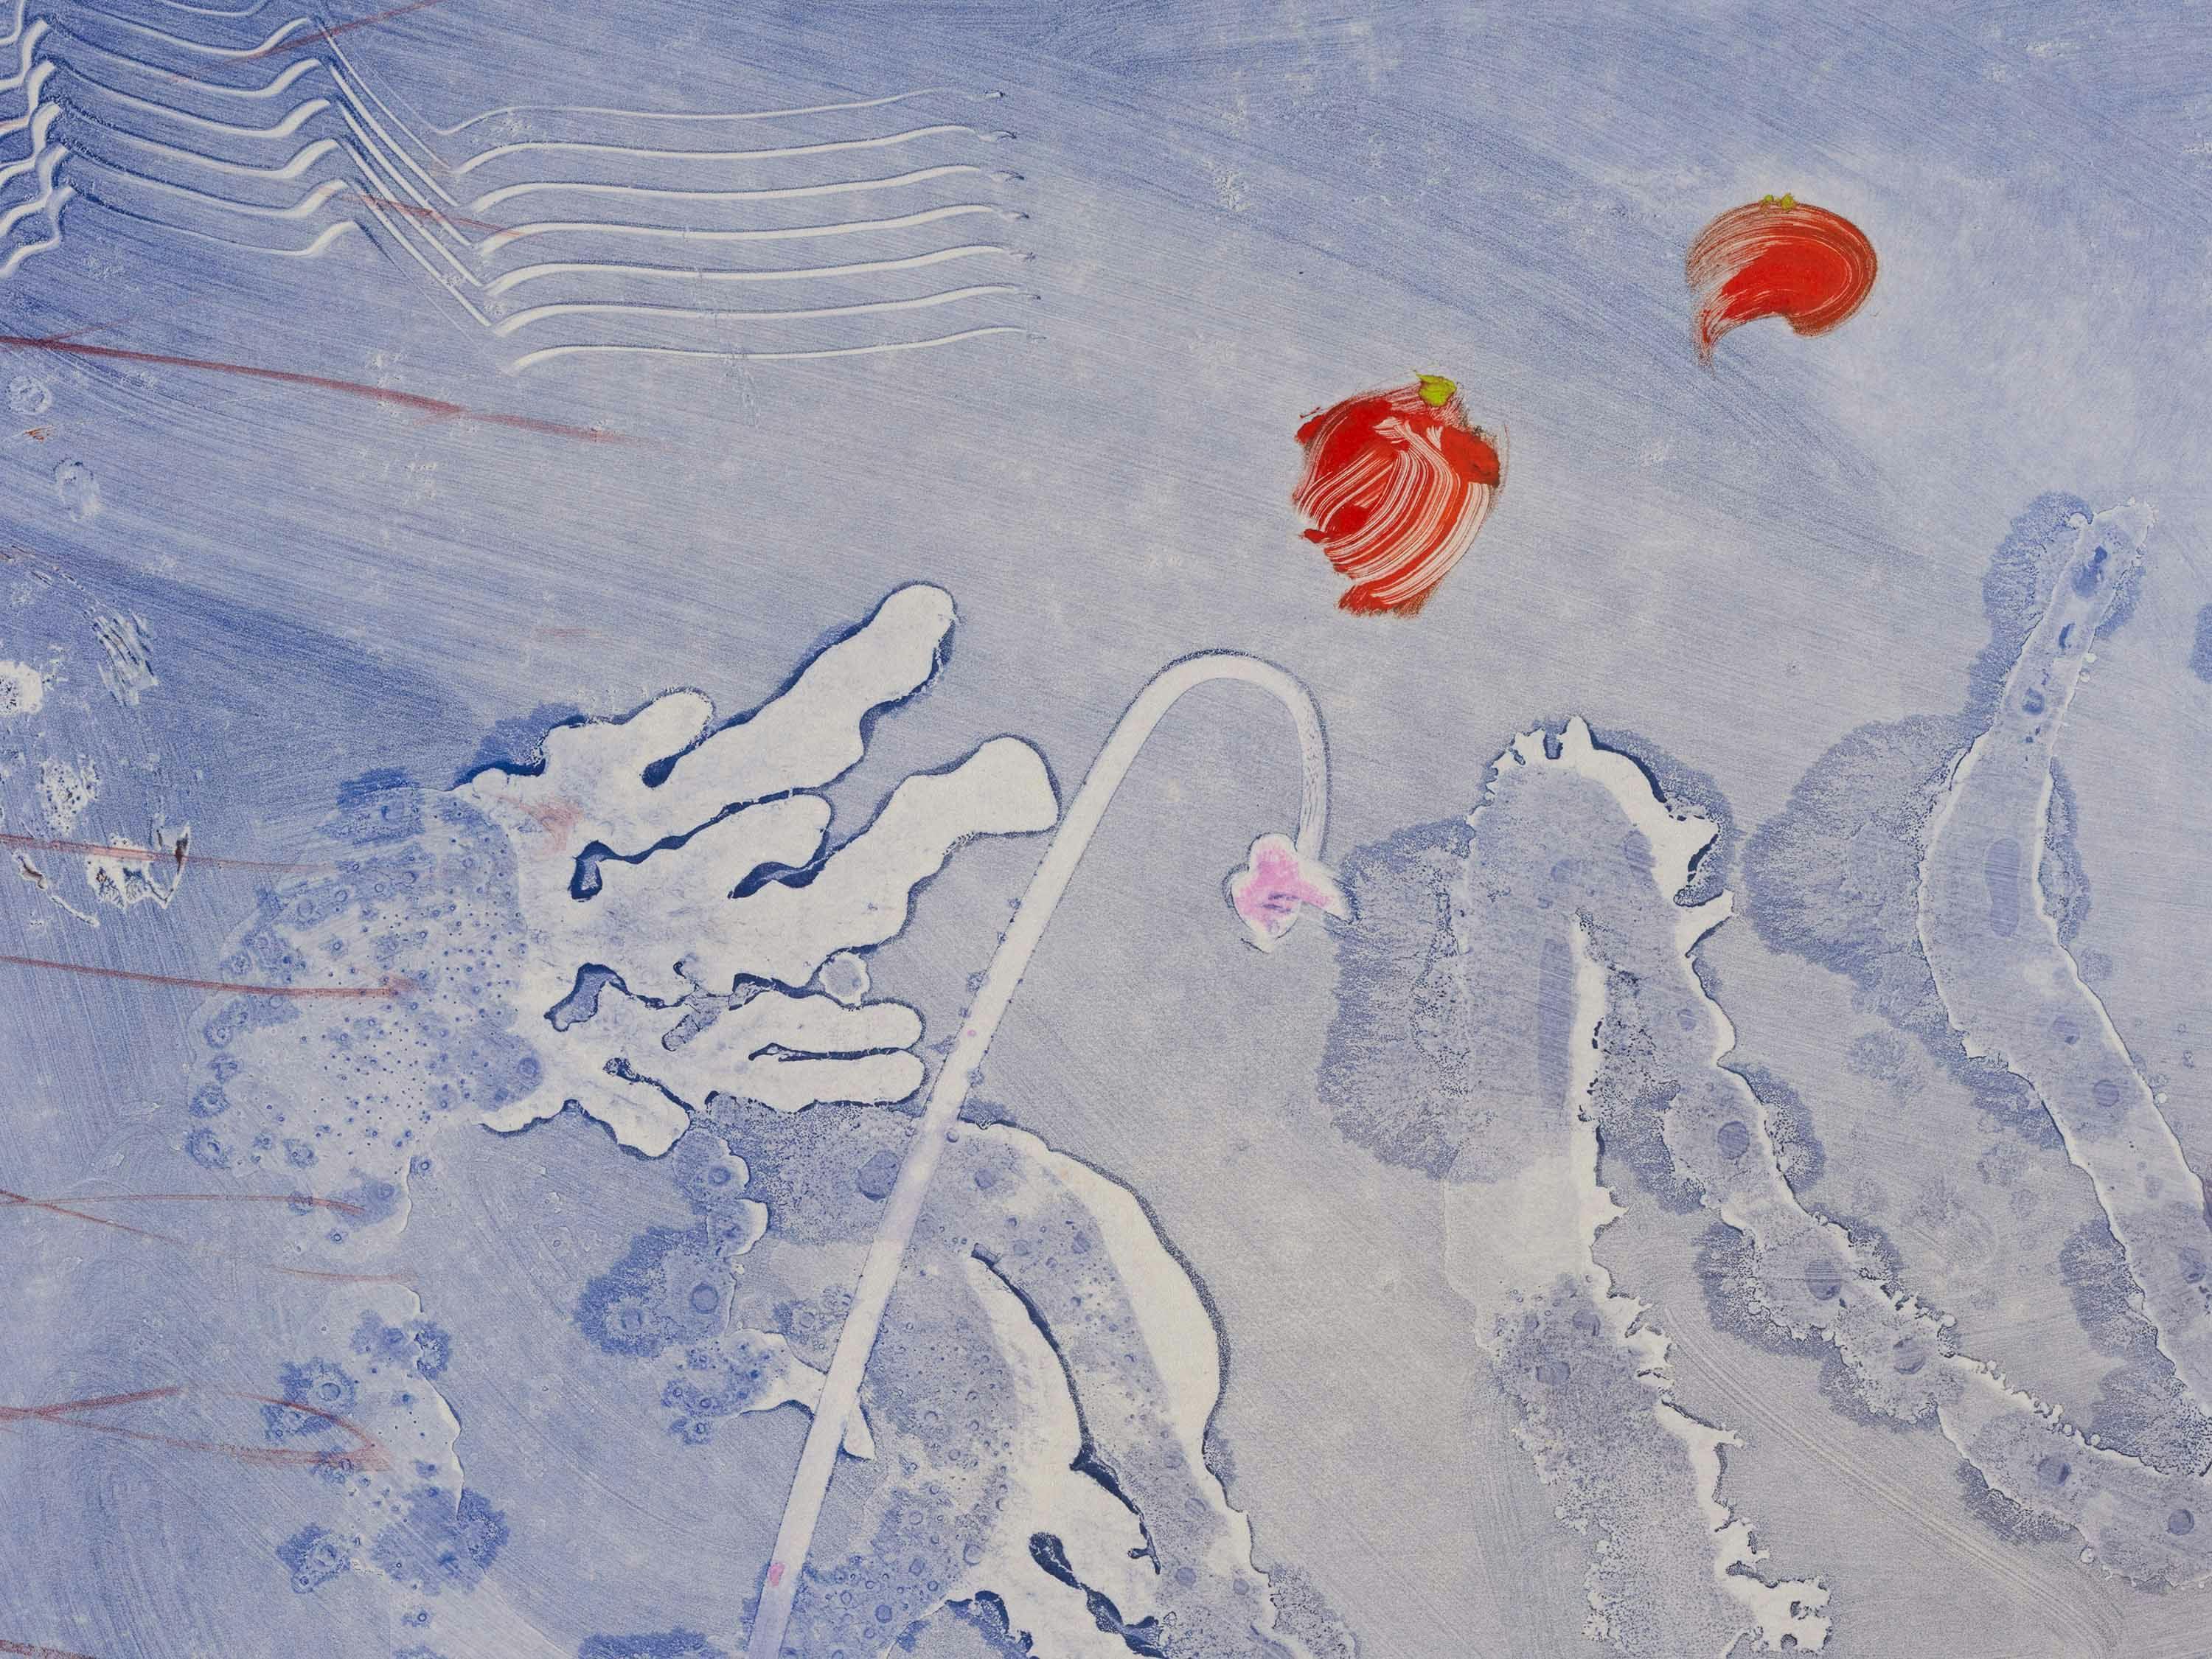 A detail from a print by Emma McIntyre, called Untitled from If not, winter, dated 2024.